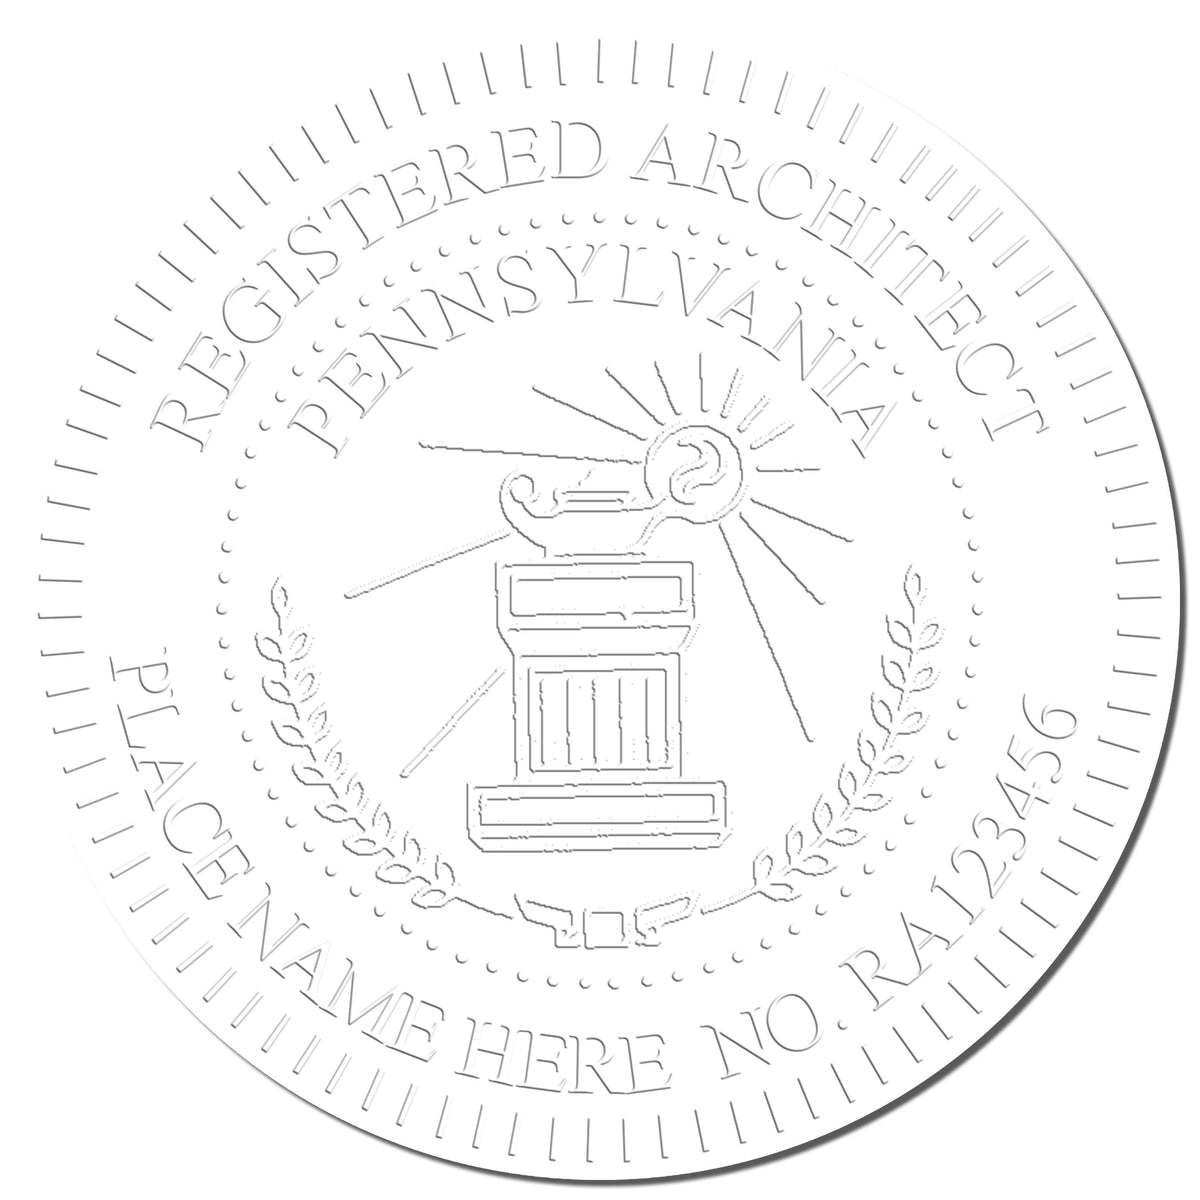 This paper is stamped with a sample imprint of the Hybrid Pennsylvania Architect Seal, signifying its quality and reliability.